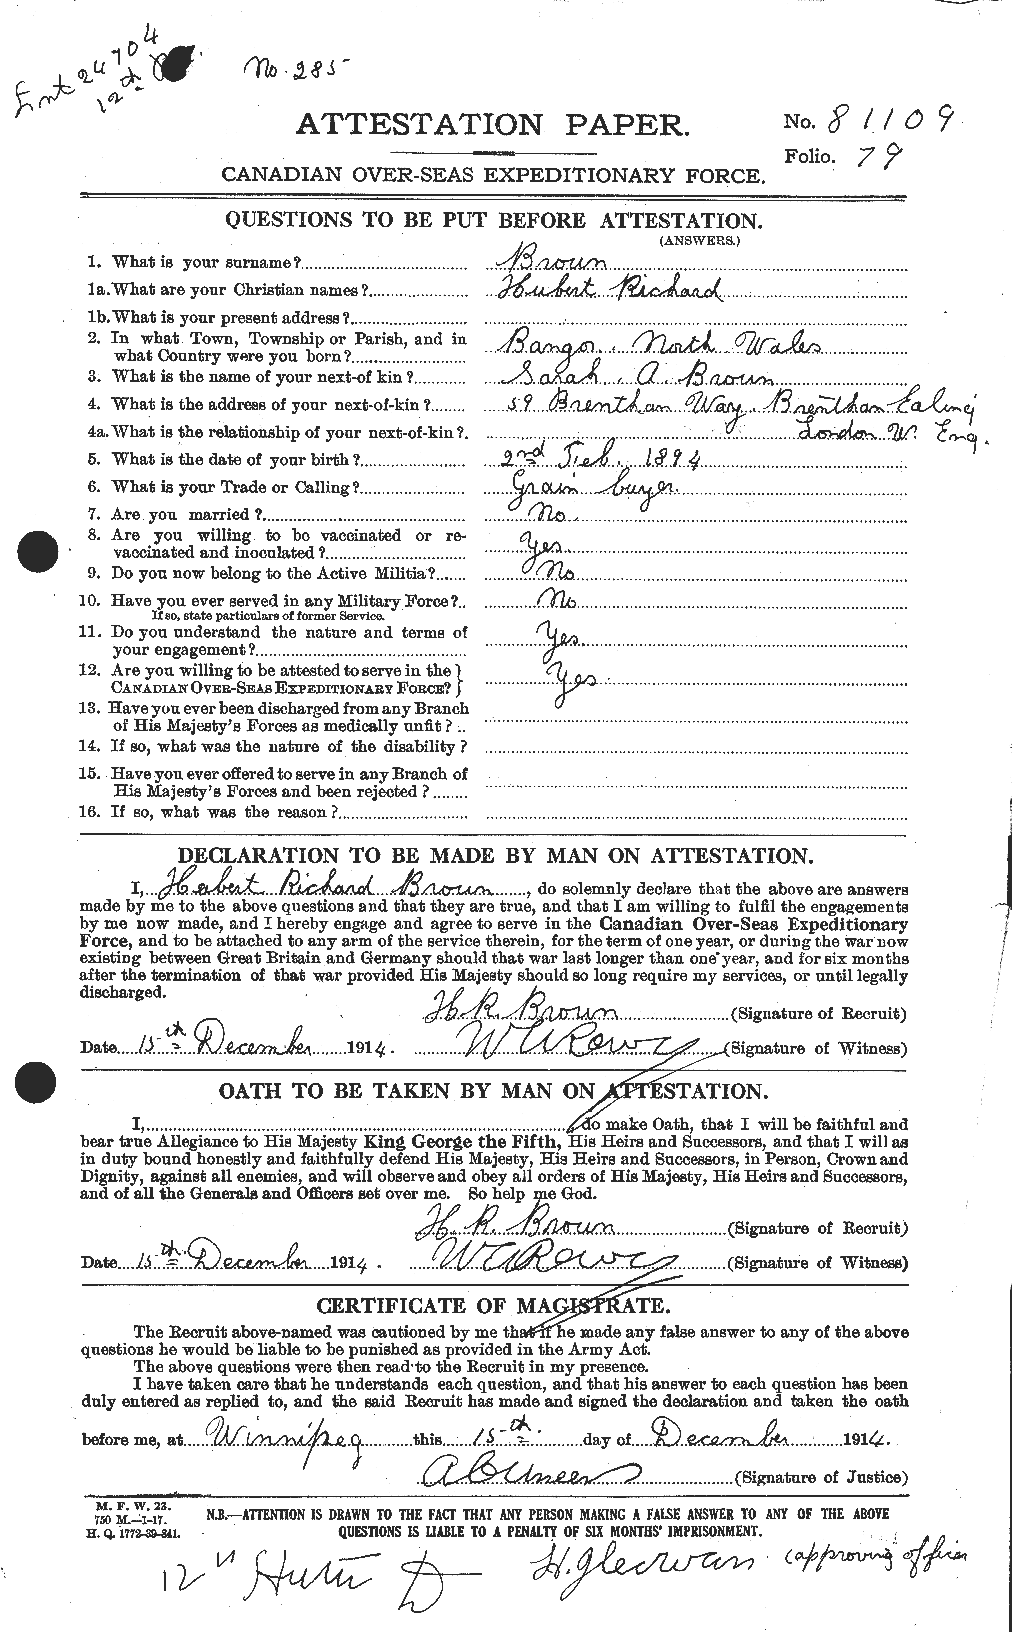 Personnel Records of the First World War - CEF 265629a